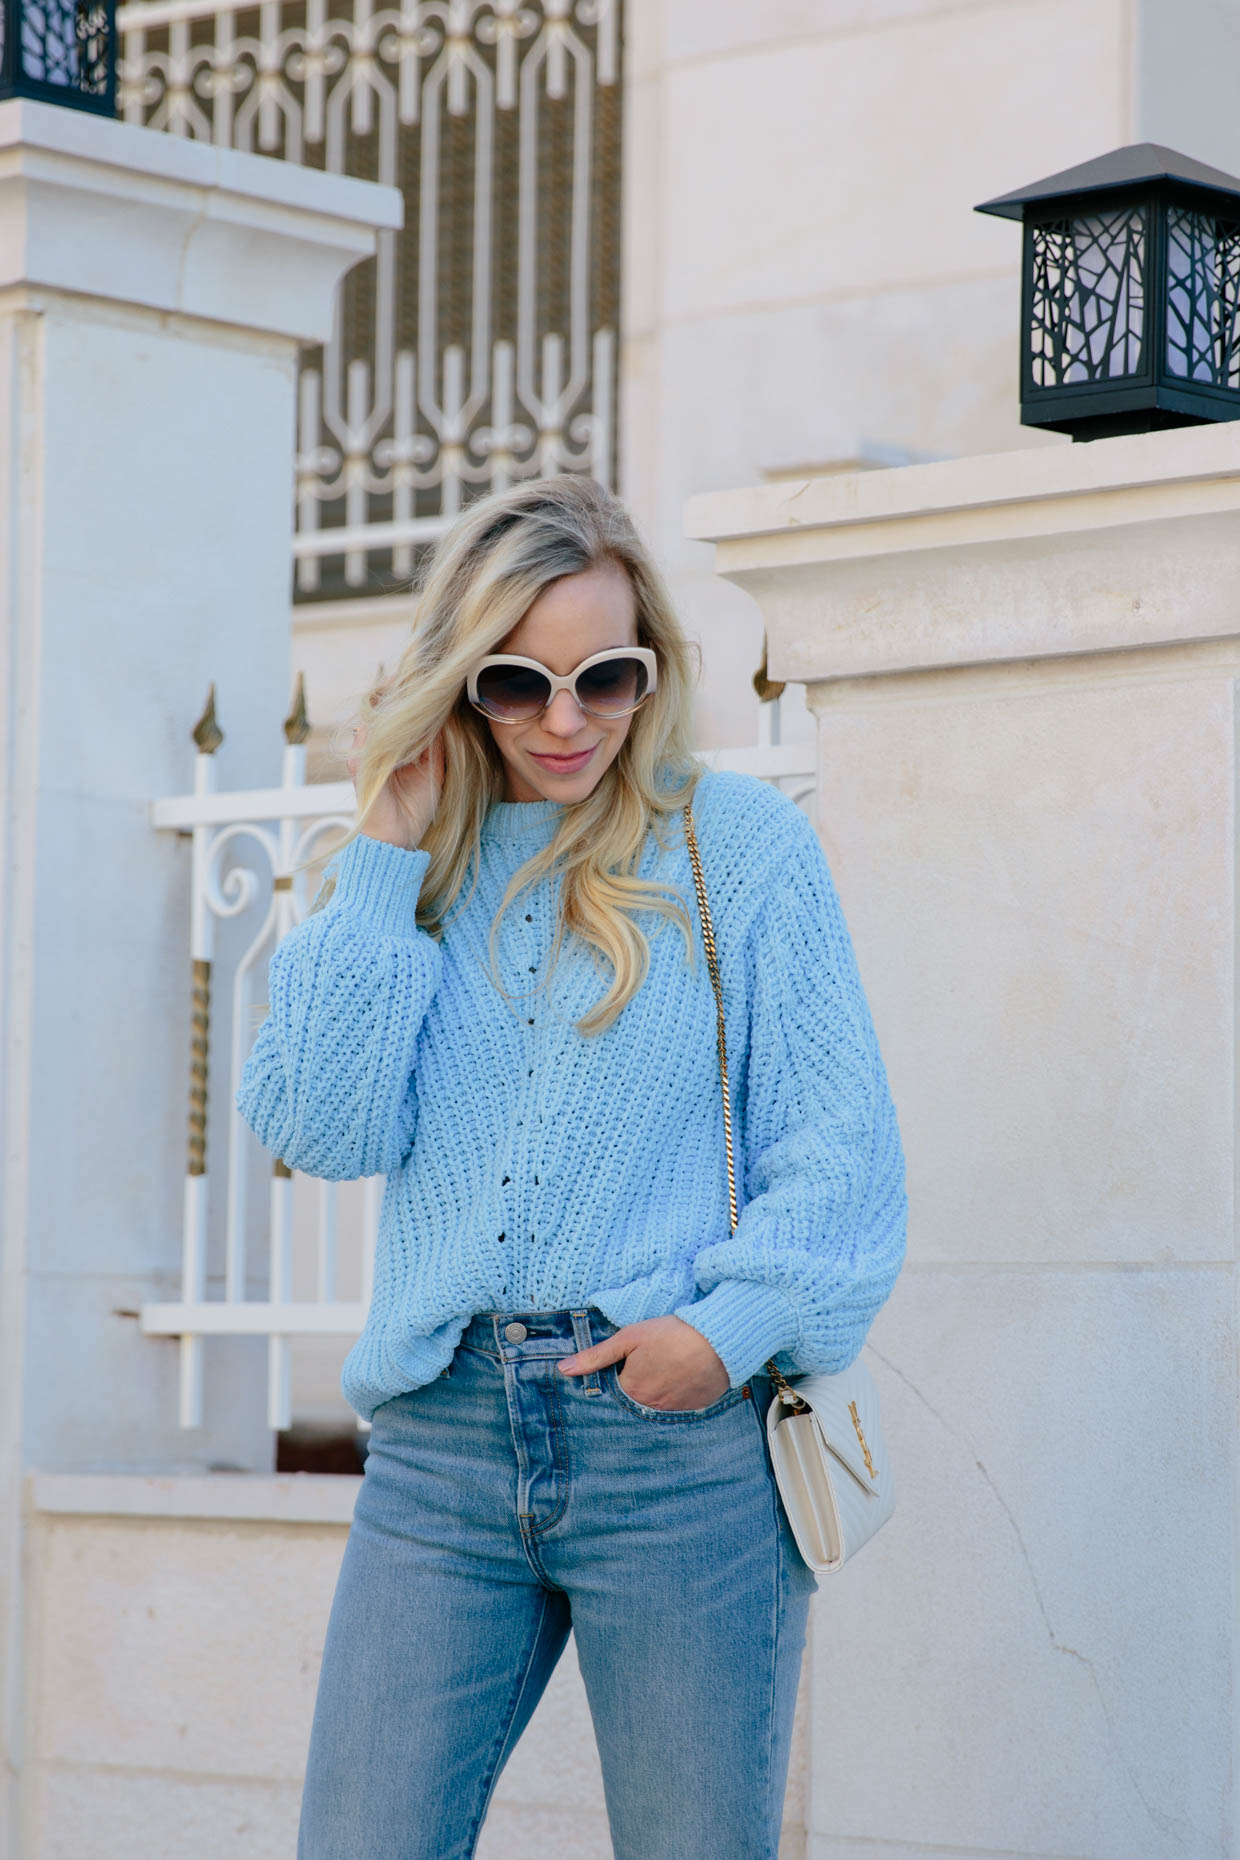 Styling a Baby Blue Sweater for Spring - Meagan's Moda